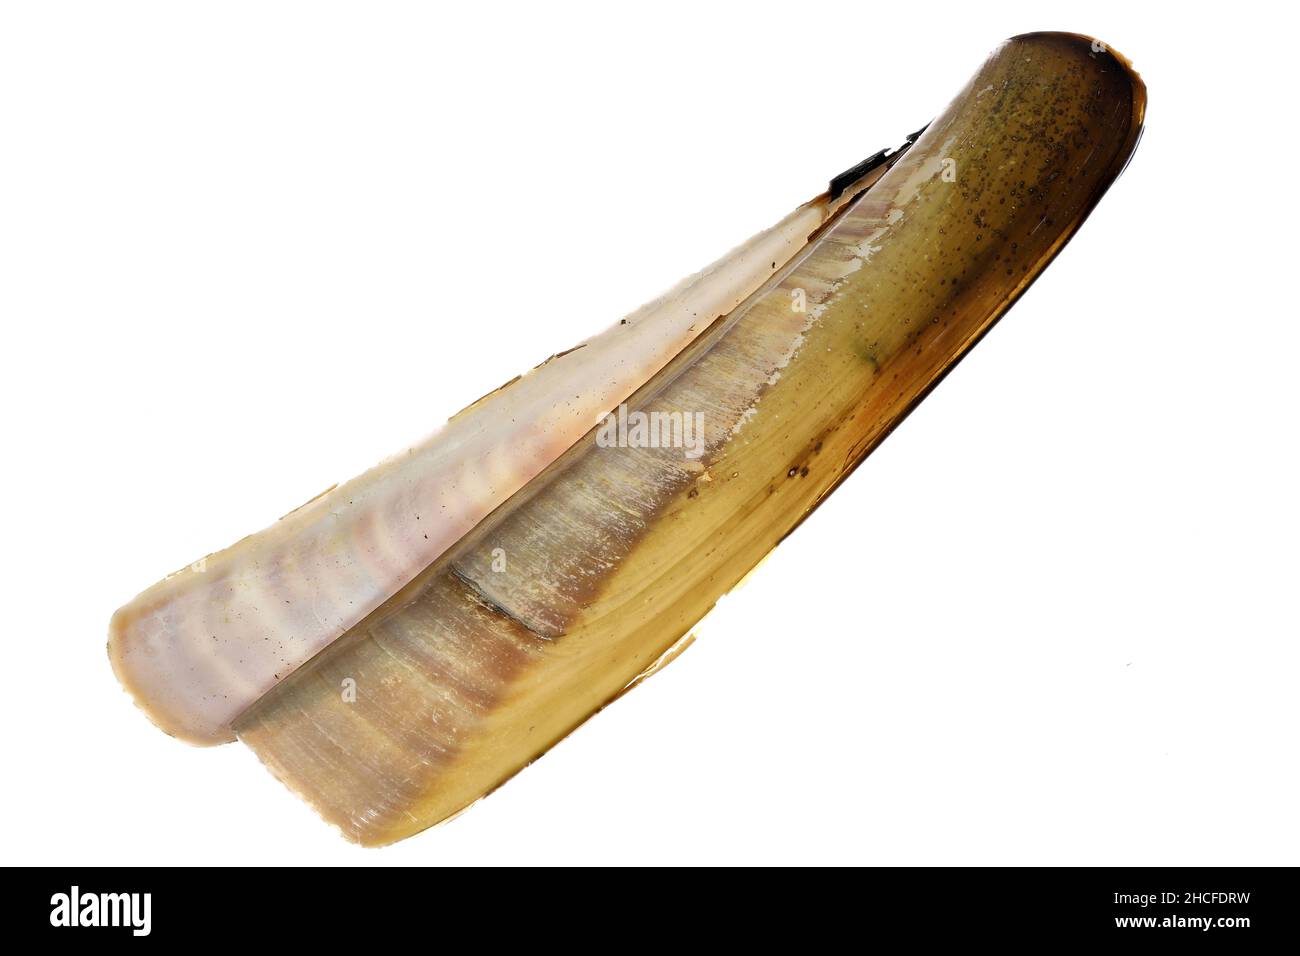 Atlantic jackknife clam (Ensis directus) from the Dutch North Sea coast isolated on white background Stock Photo